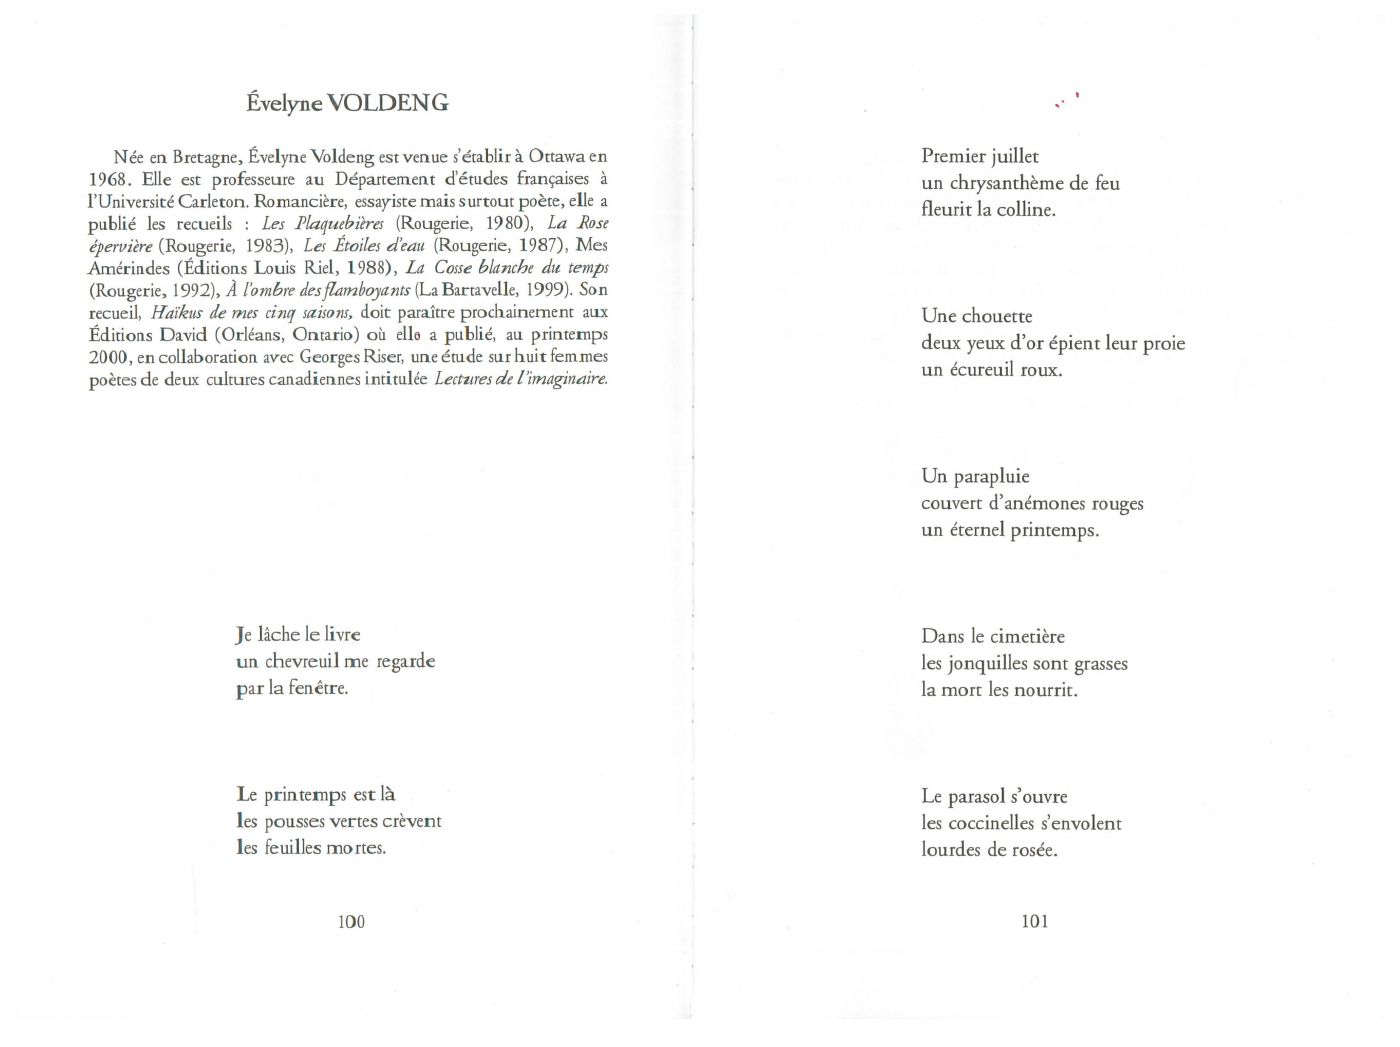 Printed document, in French. The biography of the poet, followed by a series of seven three-line haïku poems